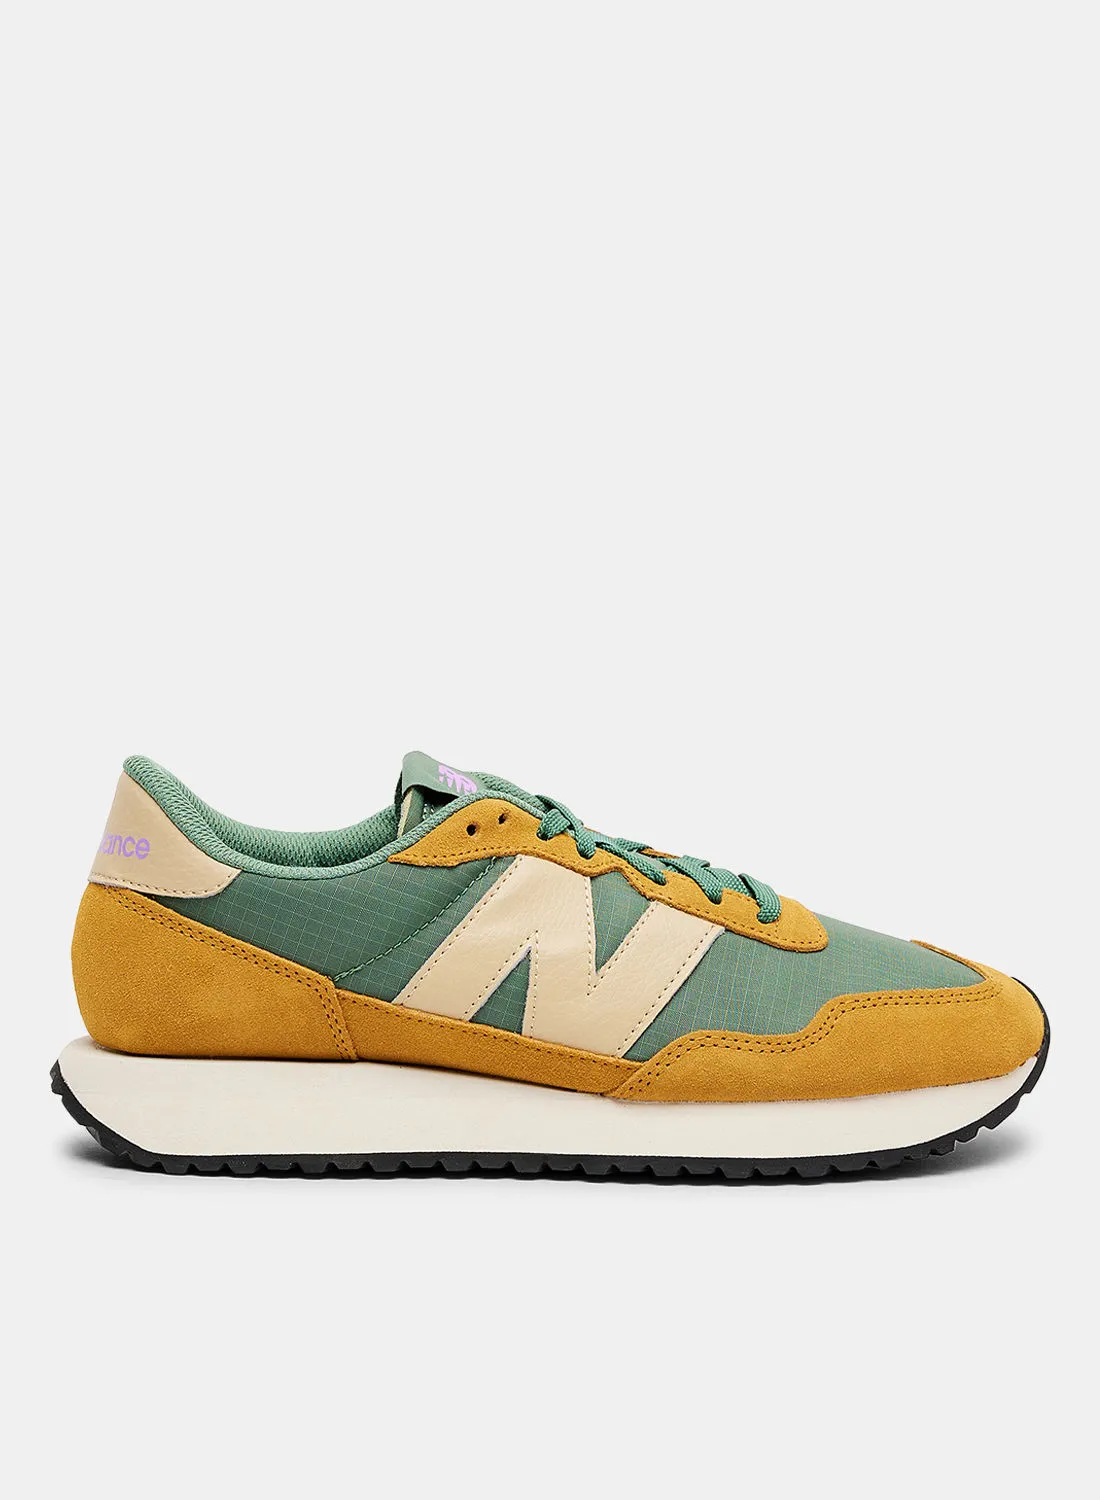 New Balance 237 Lace Up Sneakers